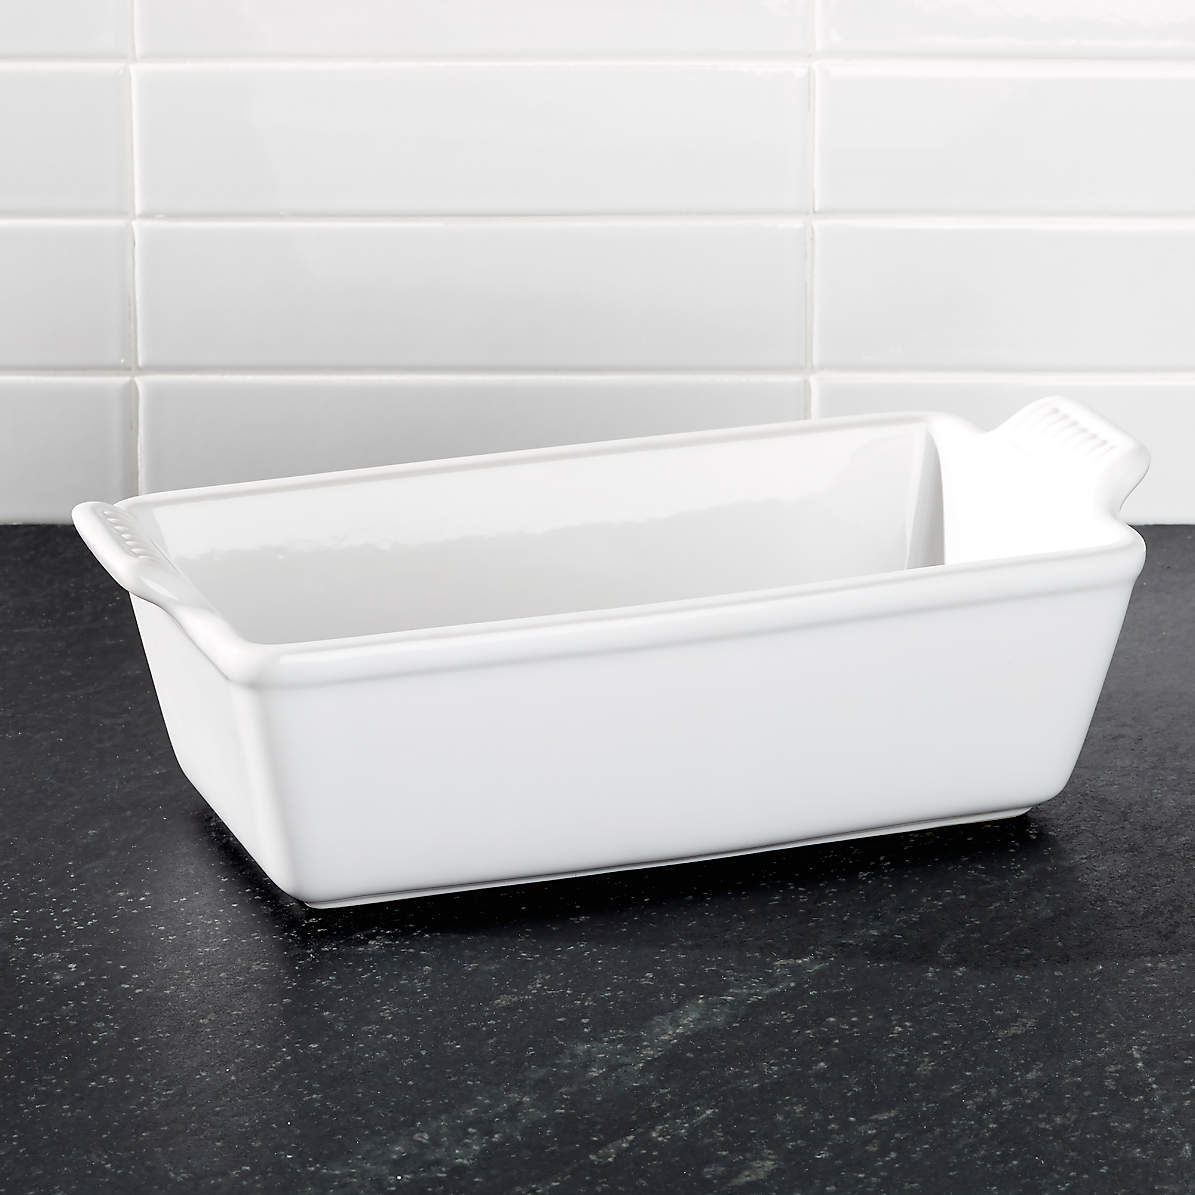 NEW White Le Creuset Stoneware Square 5.5 Inch Baking Dish 5 1/2 20 Ounce